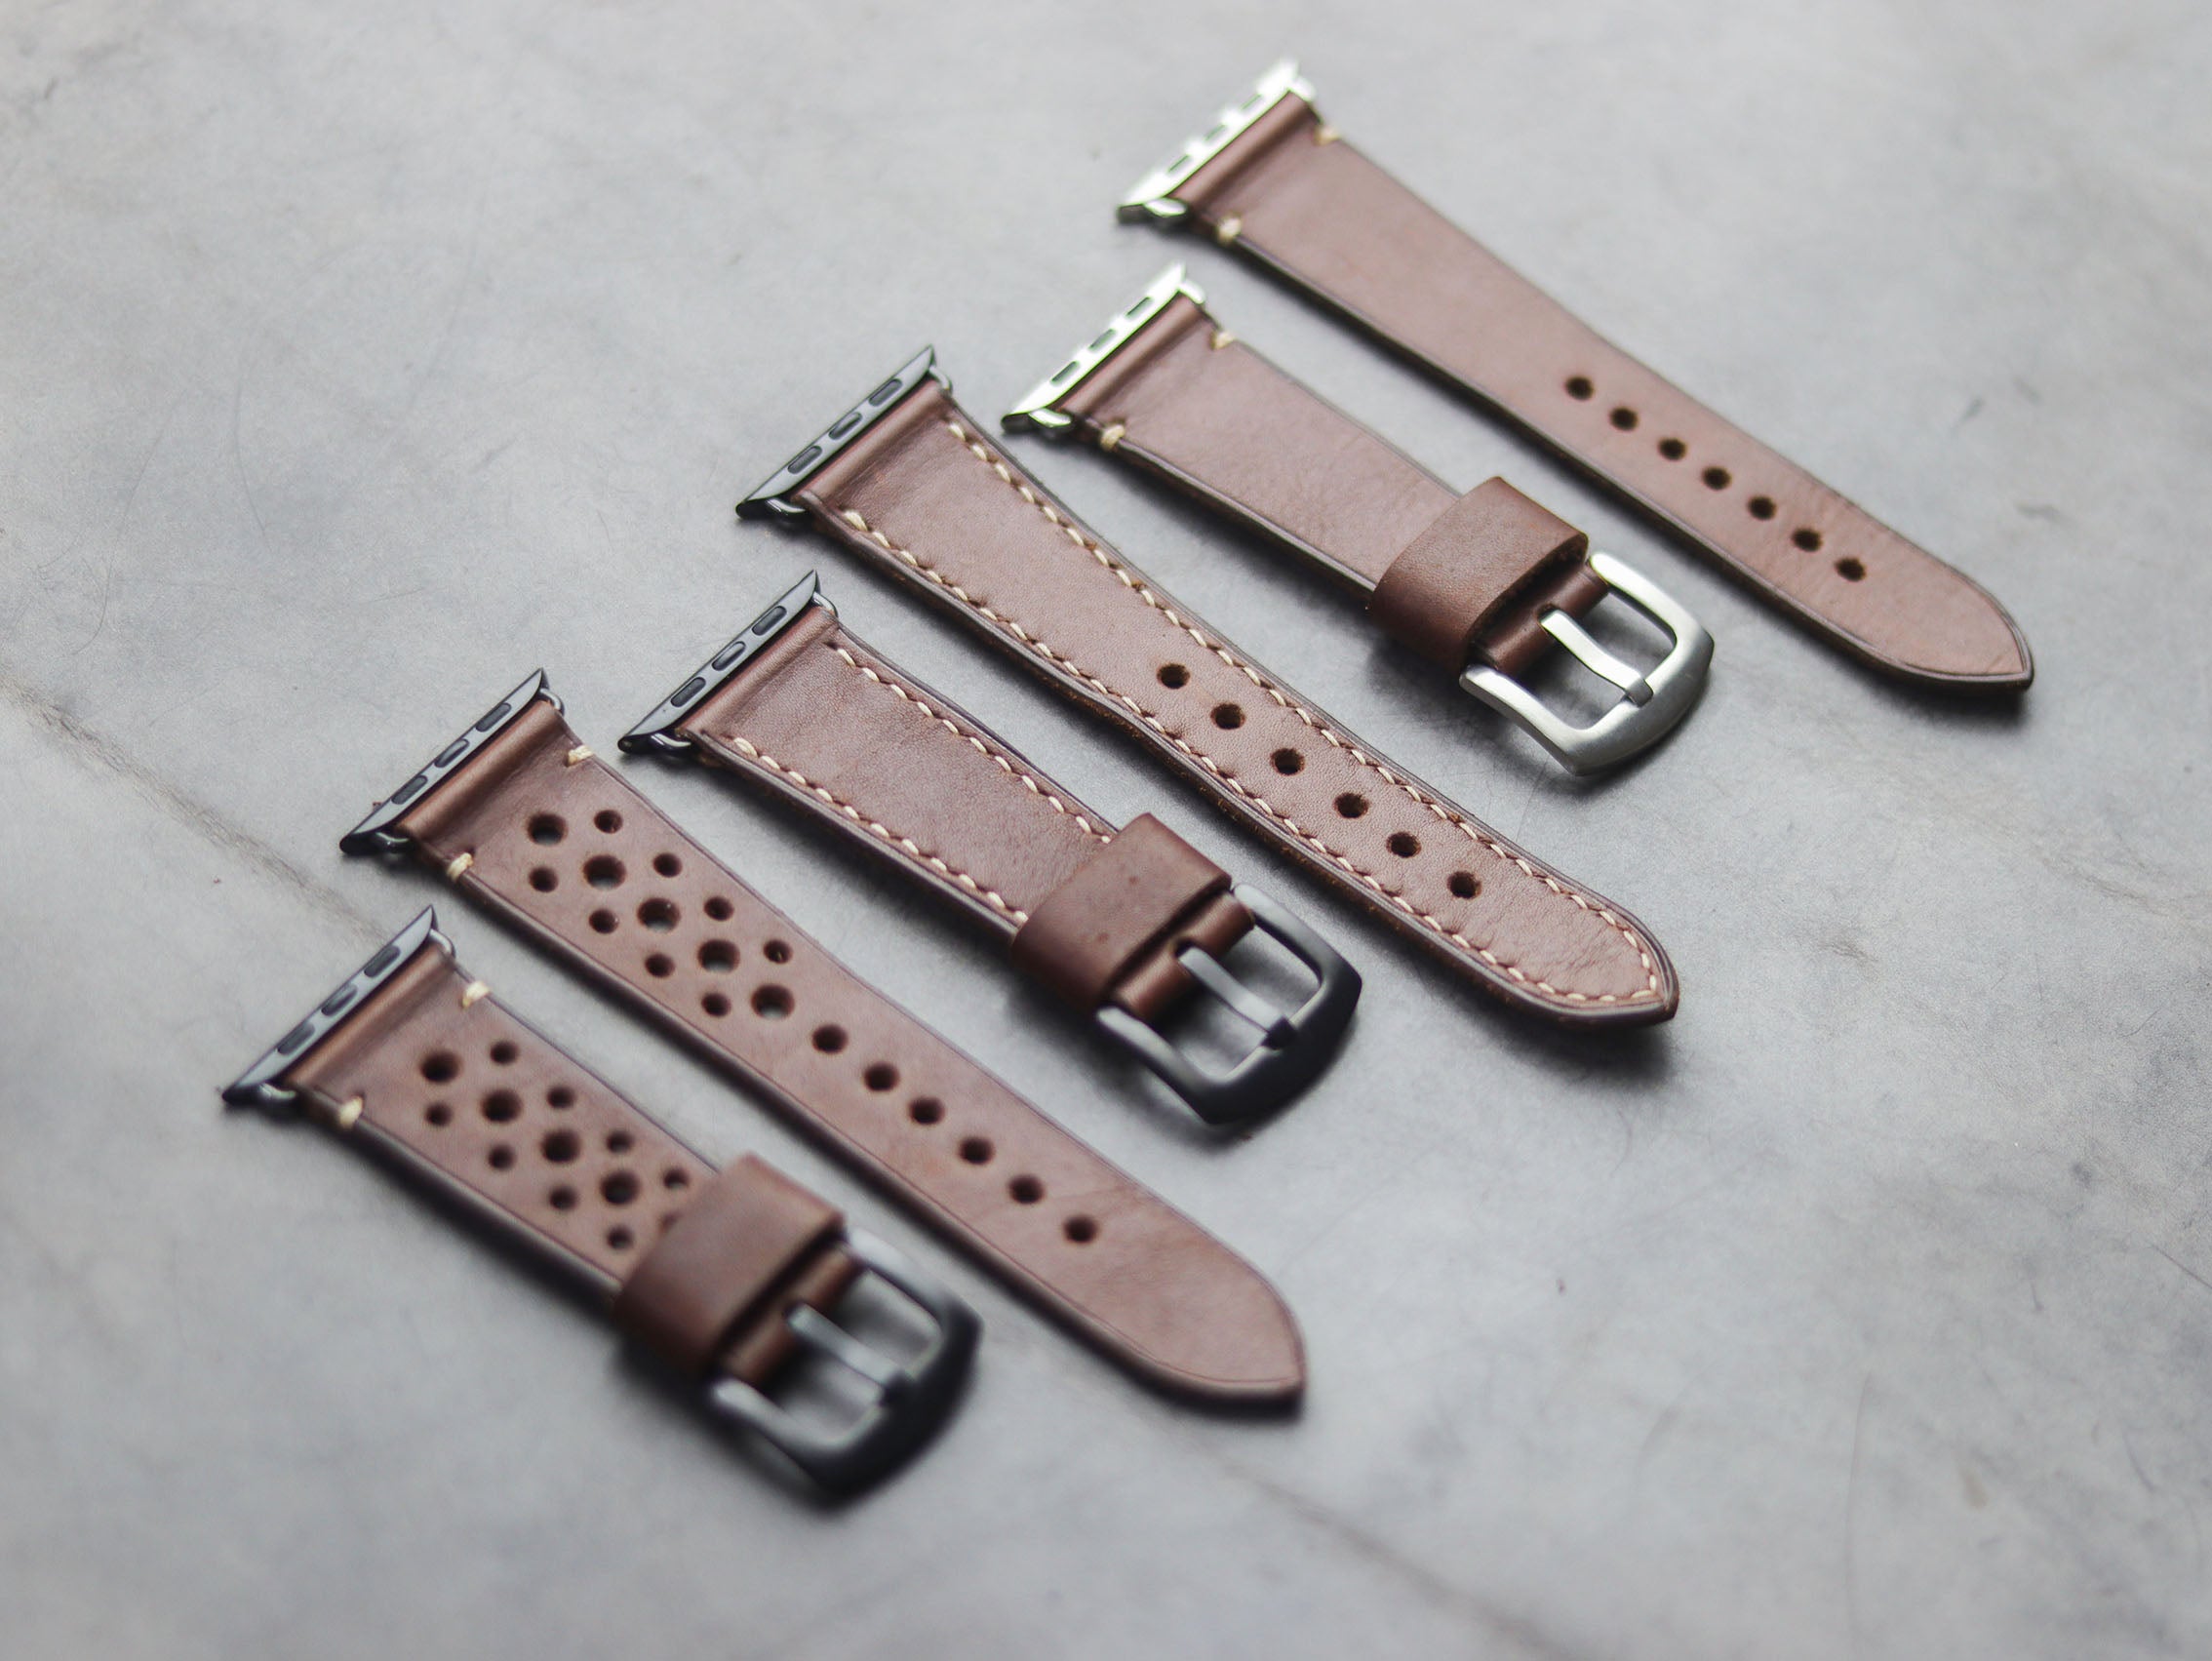 CHESTNUT BROWN FULL STITCHED HAND-CRAFTED APPLE WATCH STRAPS